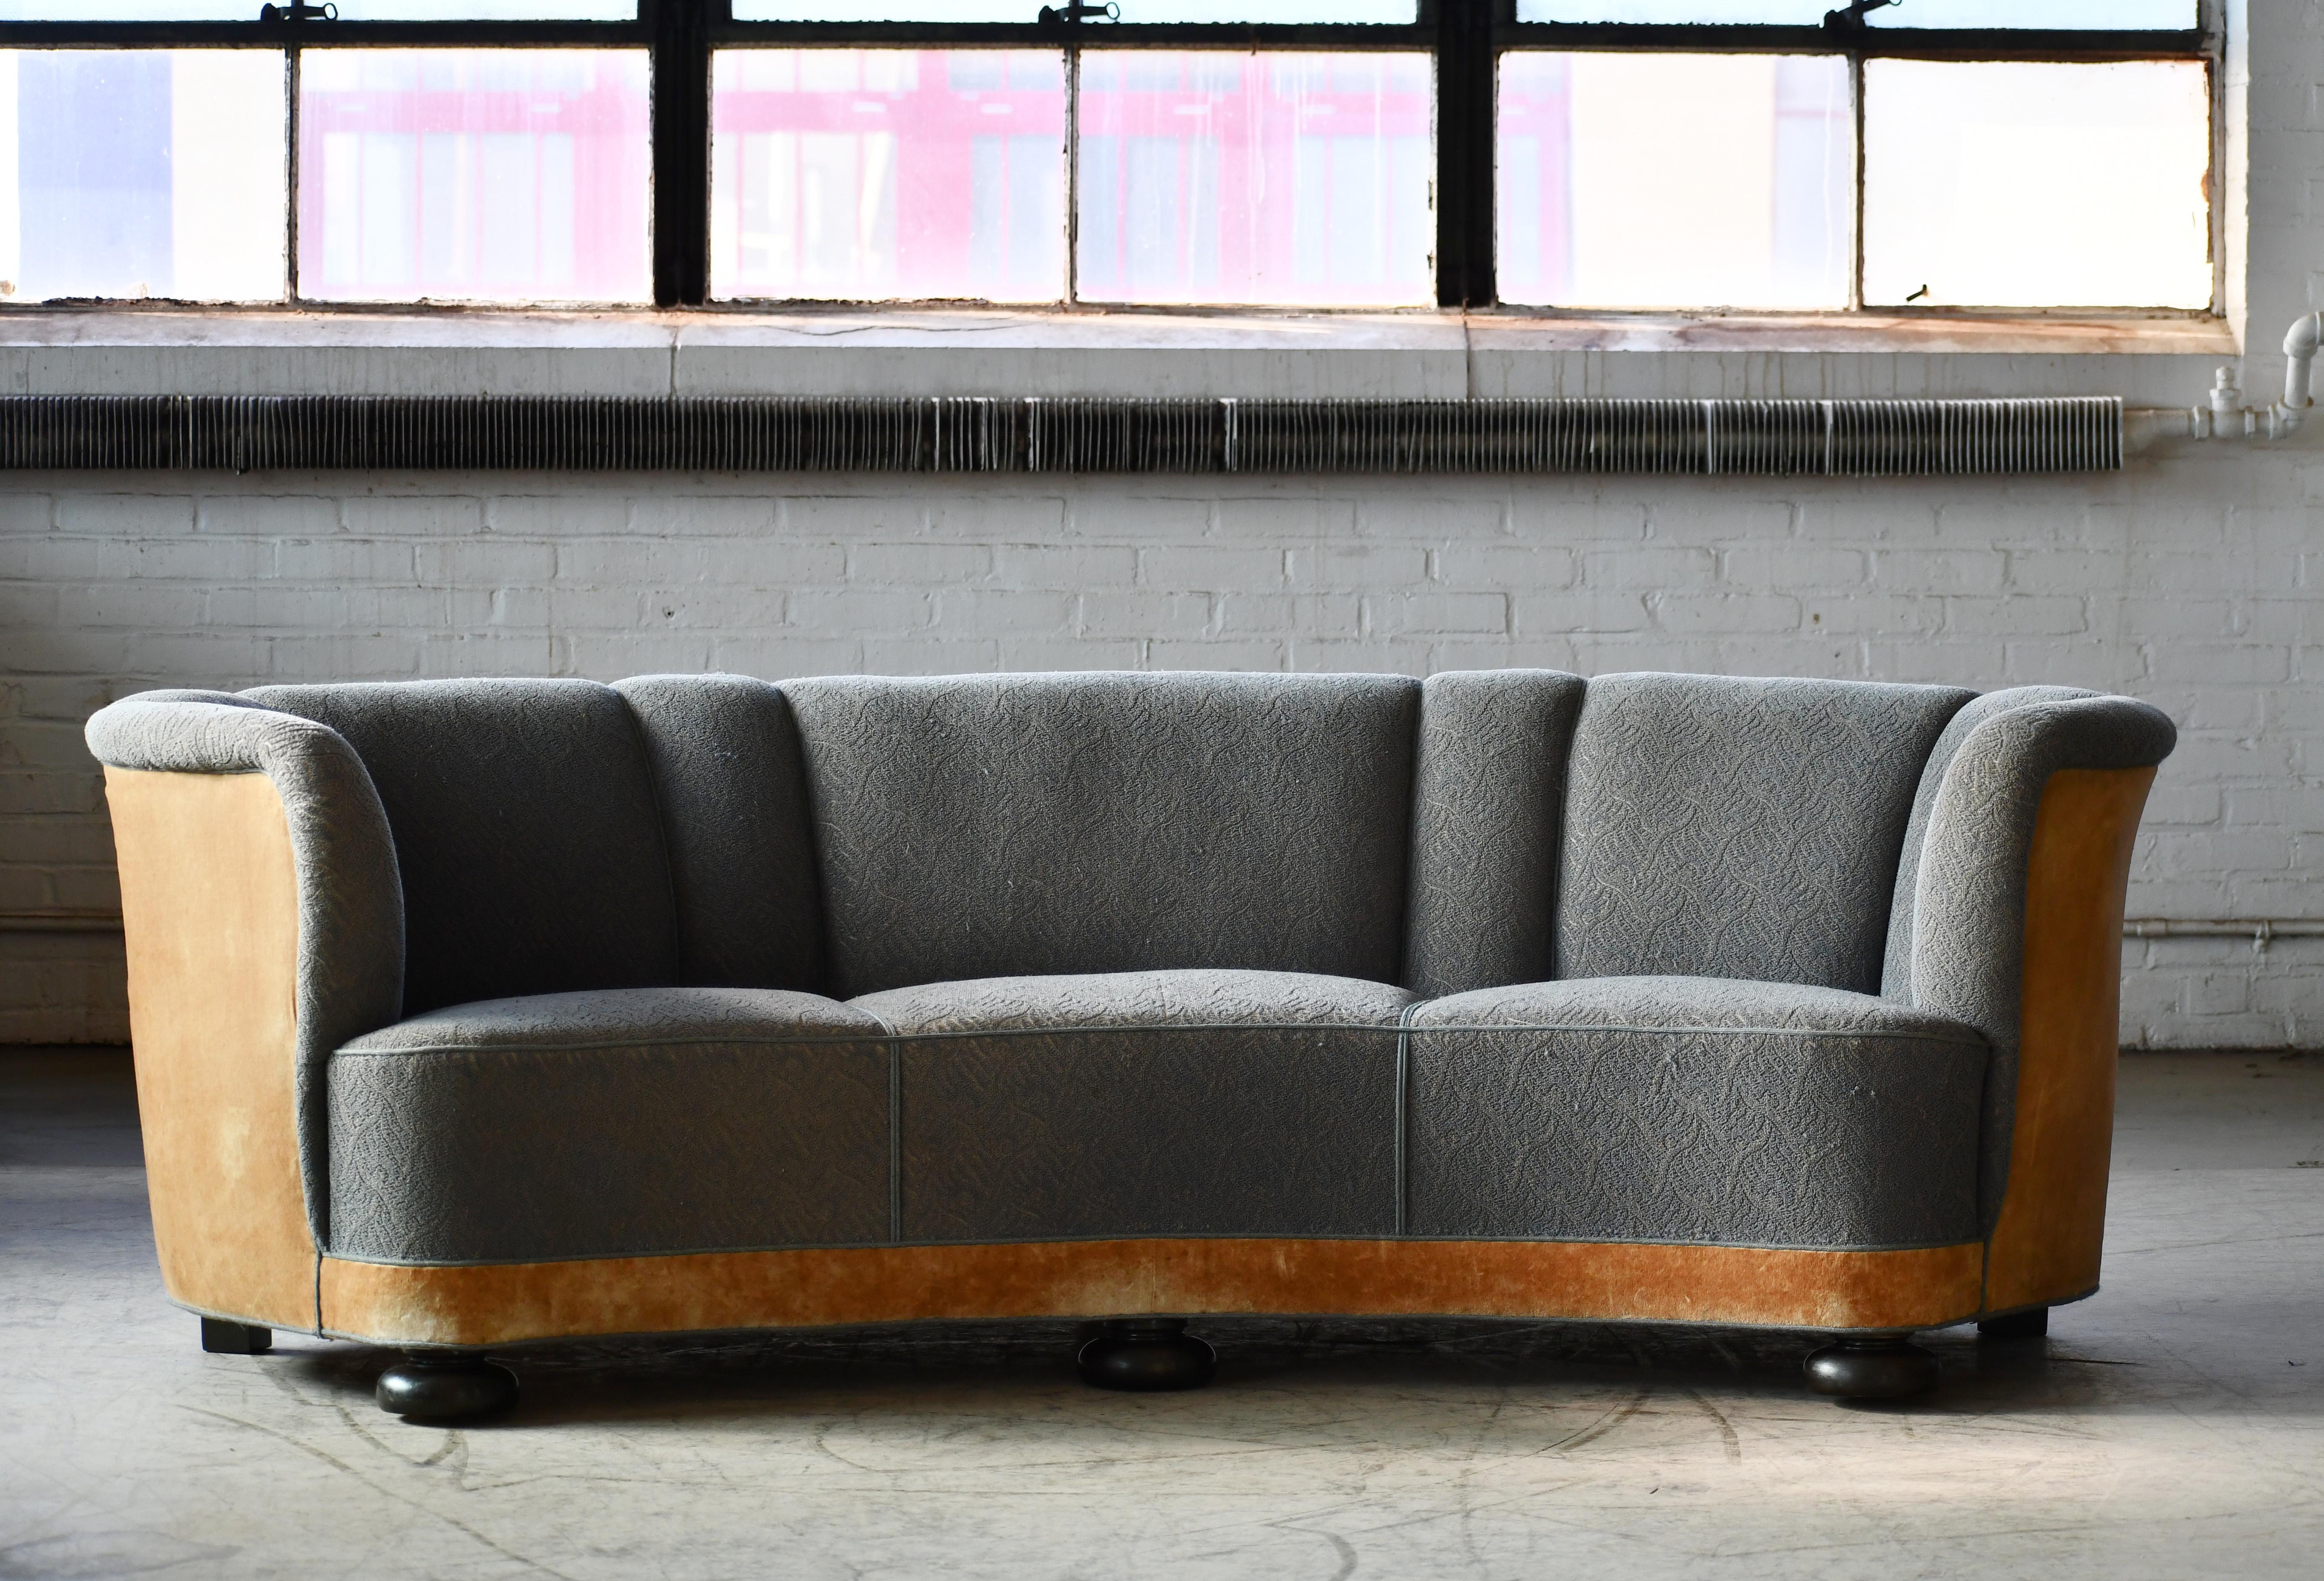 Large banana shaped or curved sofa made in Denmark, circa 1940. This sofa will make strong statement in any room. Beautiful round voluptuous lines and with large bun feet providing a for an elegant and impressive look with it's long length. Somewhat